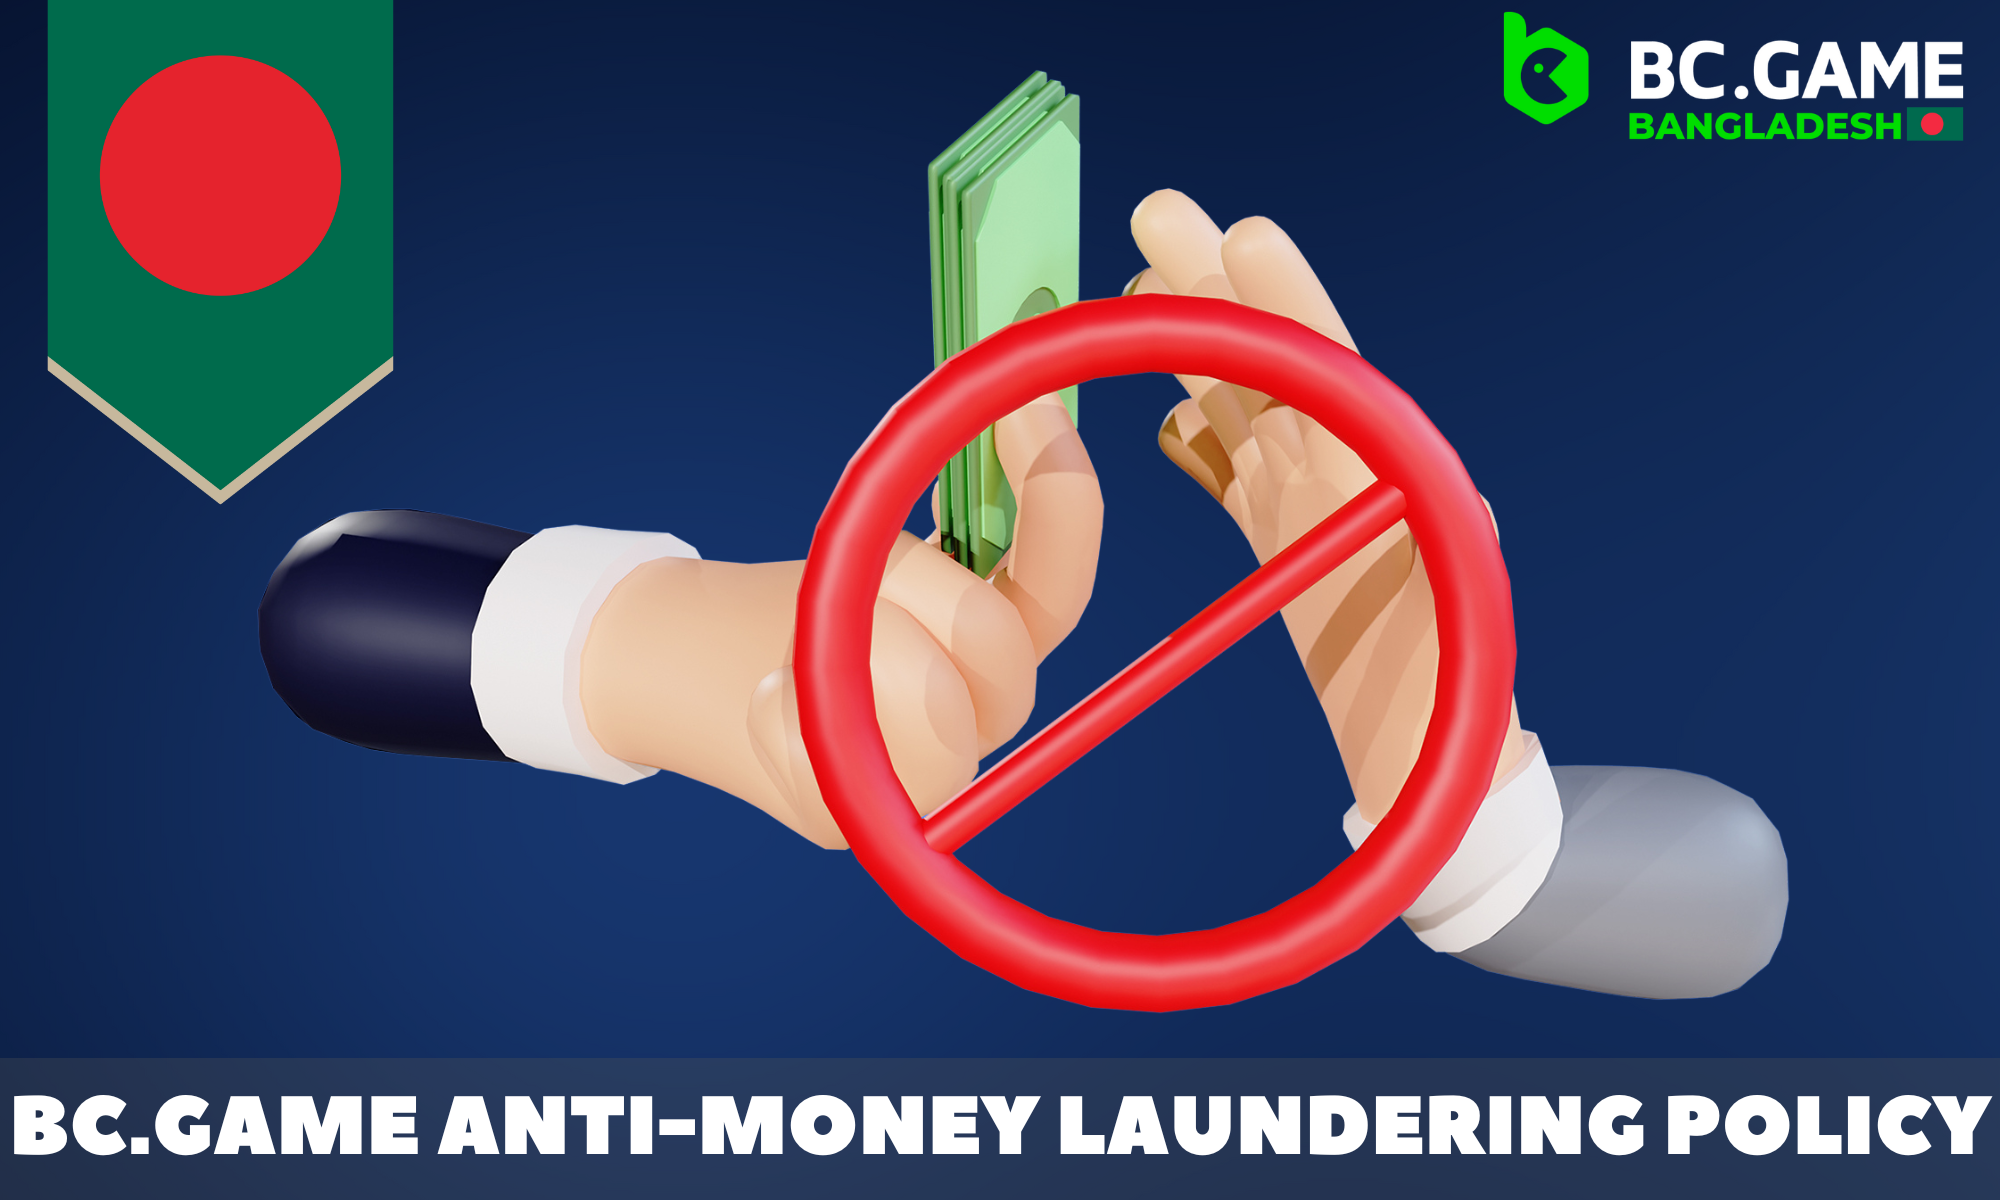 BC.GAME adheres to the rules of the anti-money laundering policy and conducts regular checks